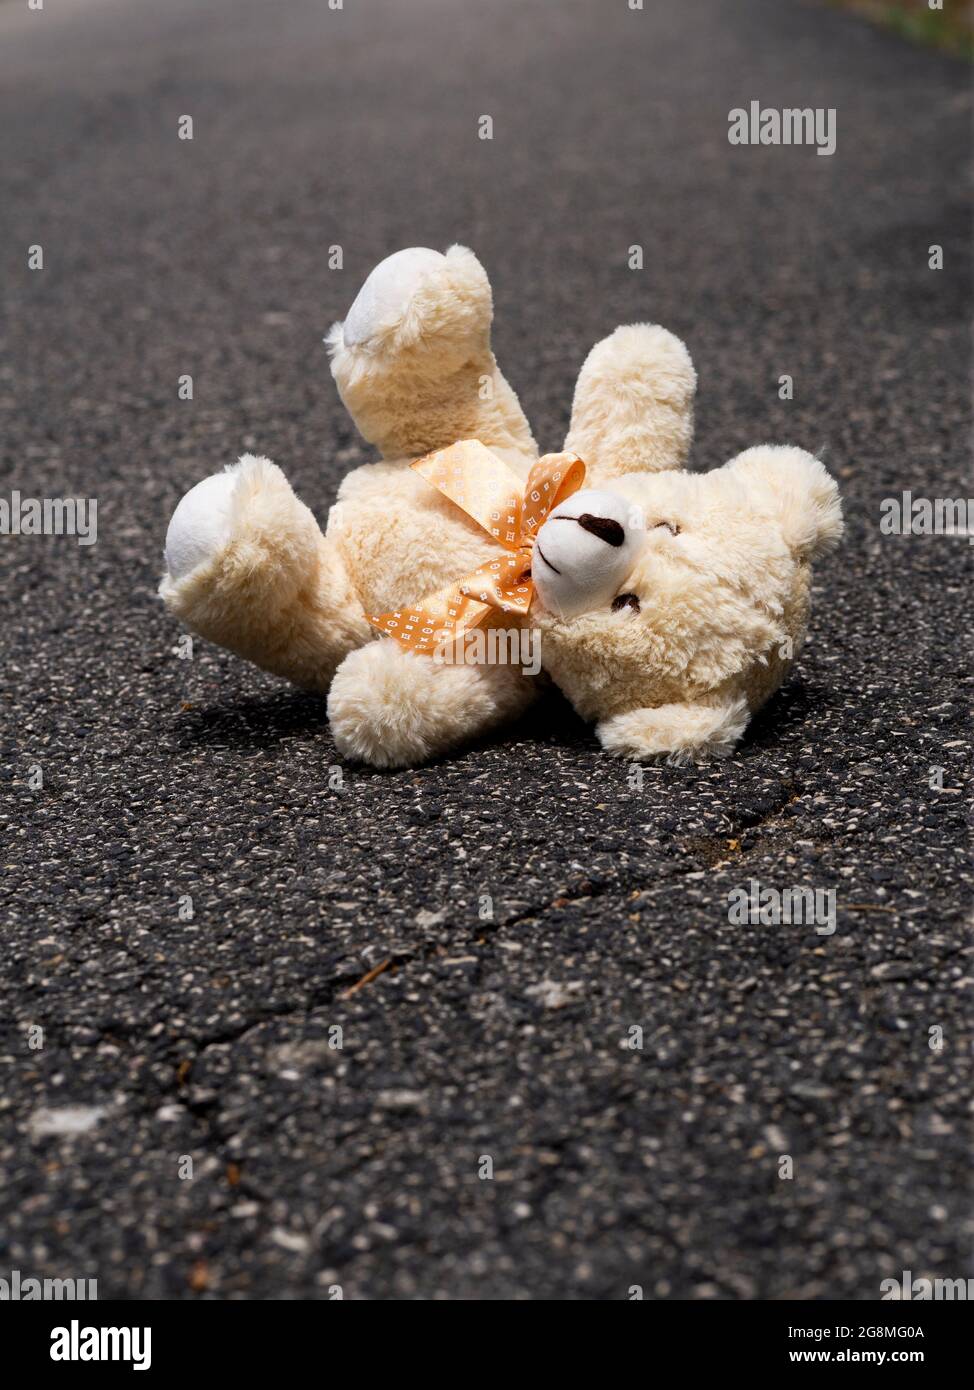 Book cover concept - Childhood - Back view of teddy bear on the street Stock Photo